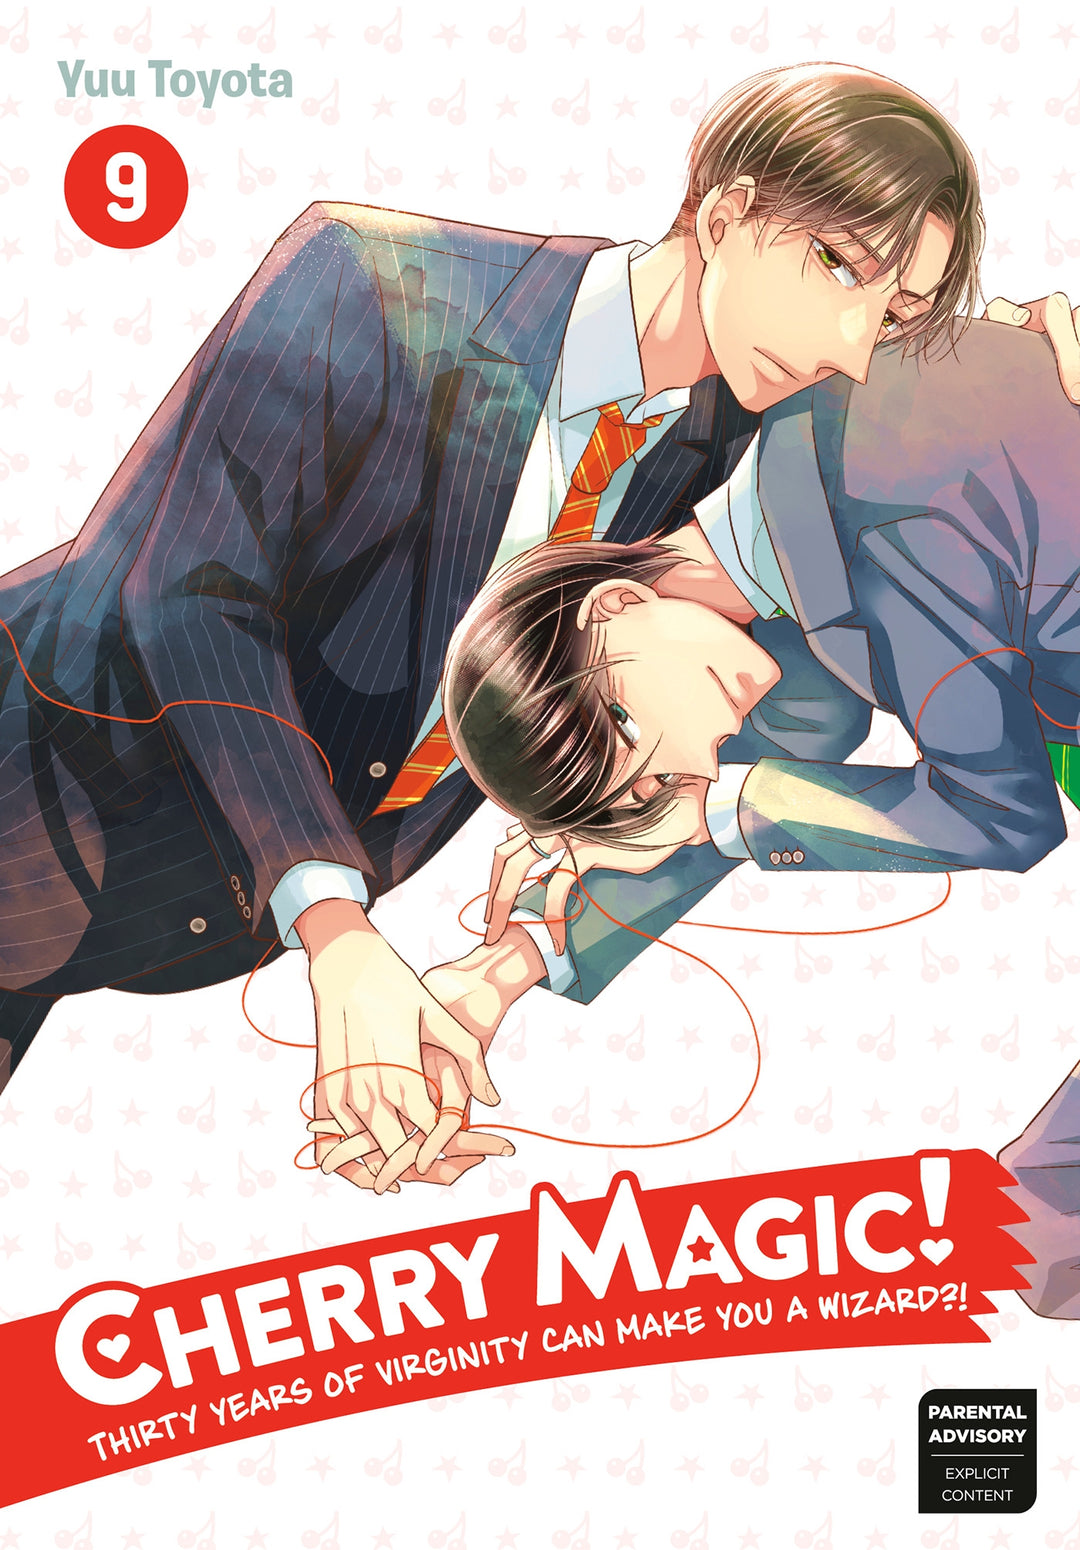 Cherry Magic! Thirty Years of Virginity Can Make You a Wizard?!, Vol. 09